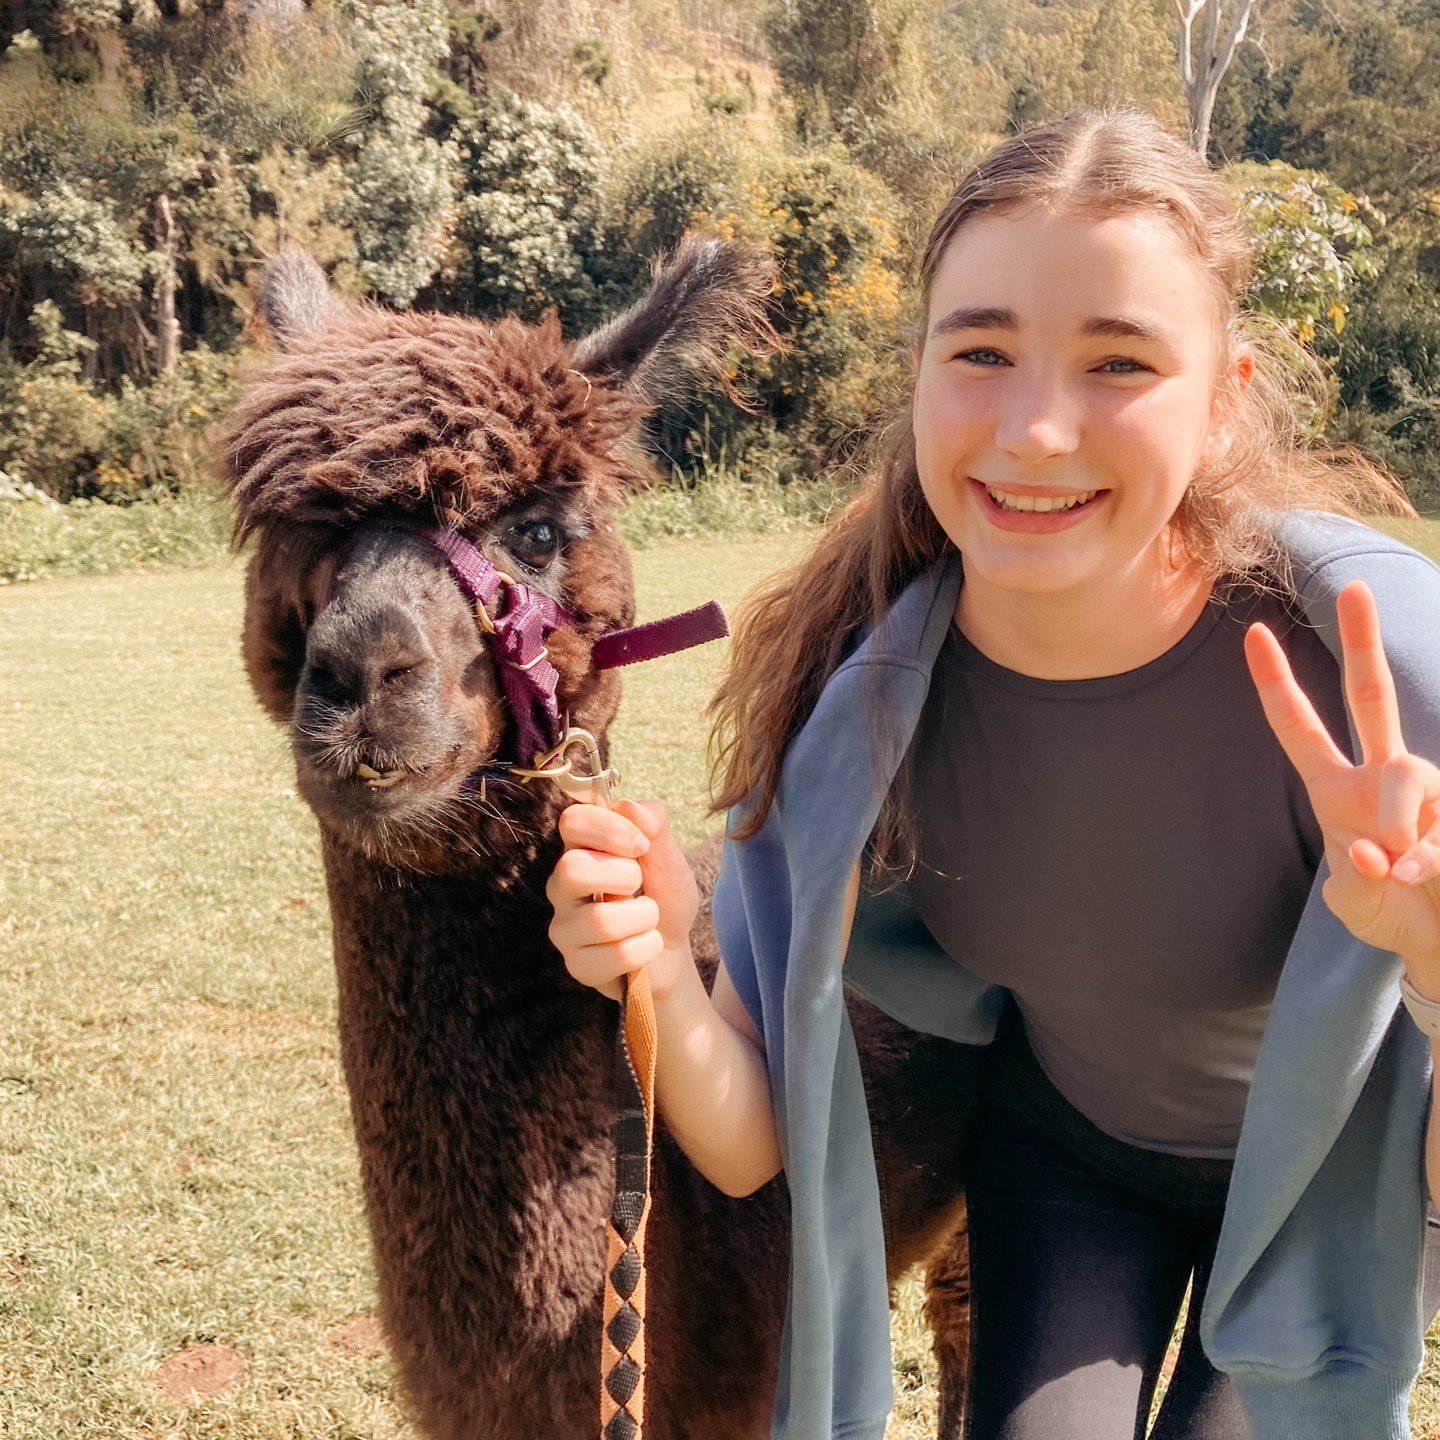 Visiting an alpaca farm! 🦙

This week while on holidays in Queensland, I visited the Mountview Alpaca Farm! I loved seeing these adorable wooly animals in real life.

I love alpaca yarn because it's so soft and fluffy and warm for Winter. Unfortunat